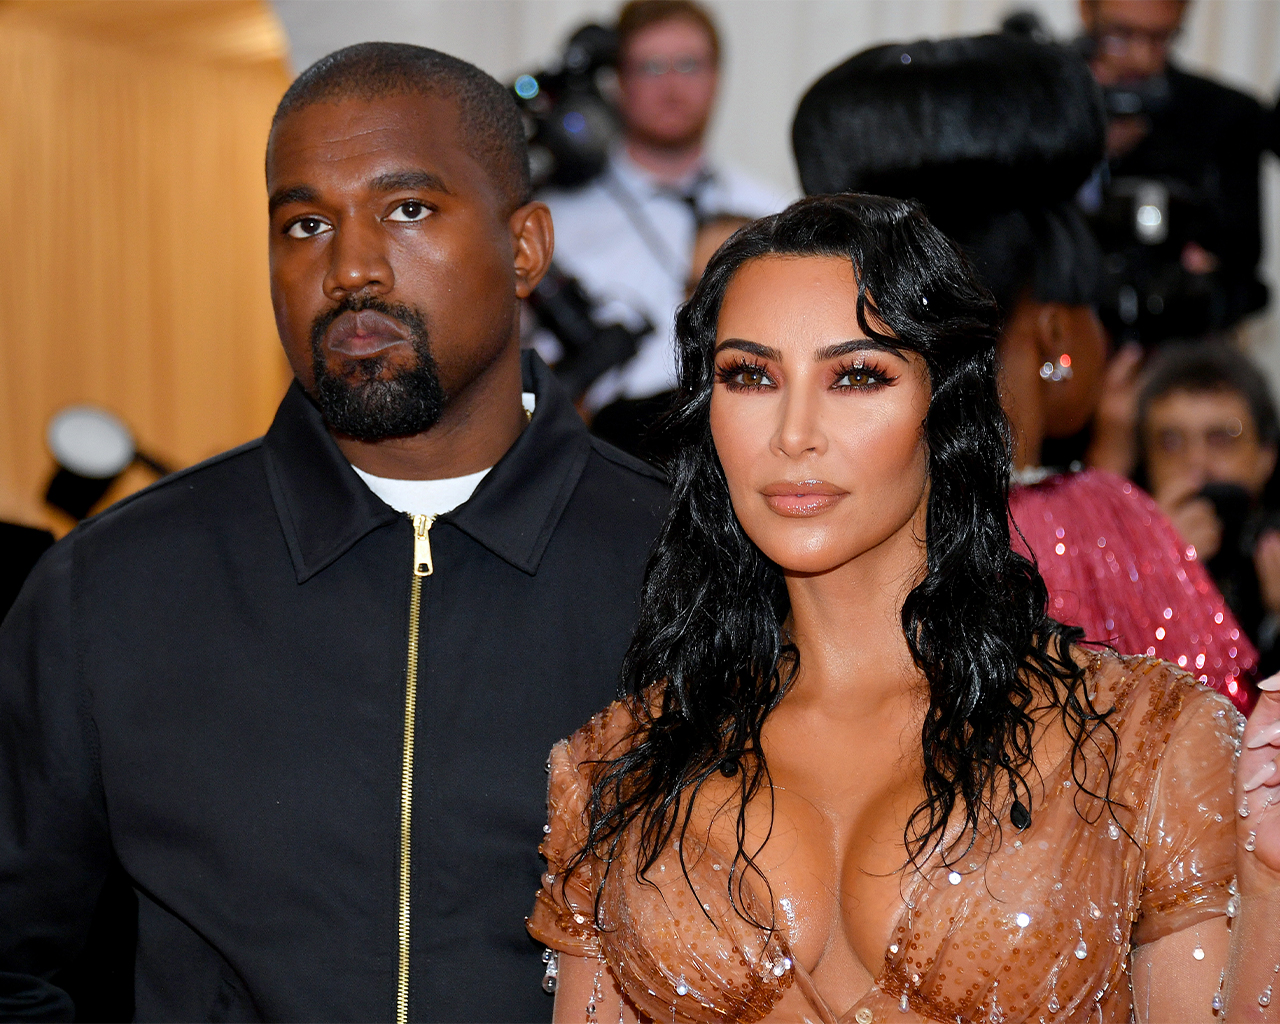 KIM KARDASHIAN REVEALS WHY SHE FILED FOR DIVORCE FROM KANYE WEST